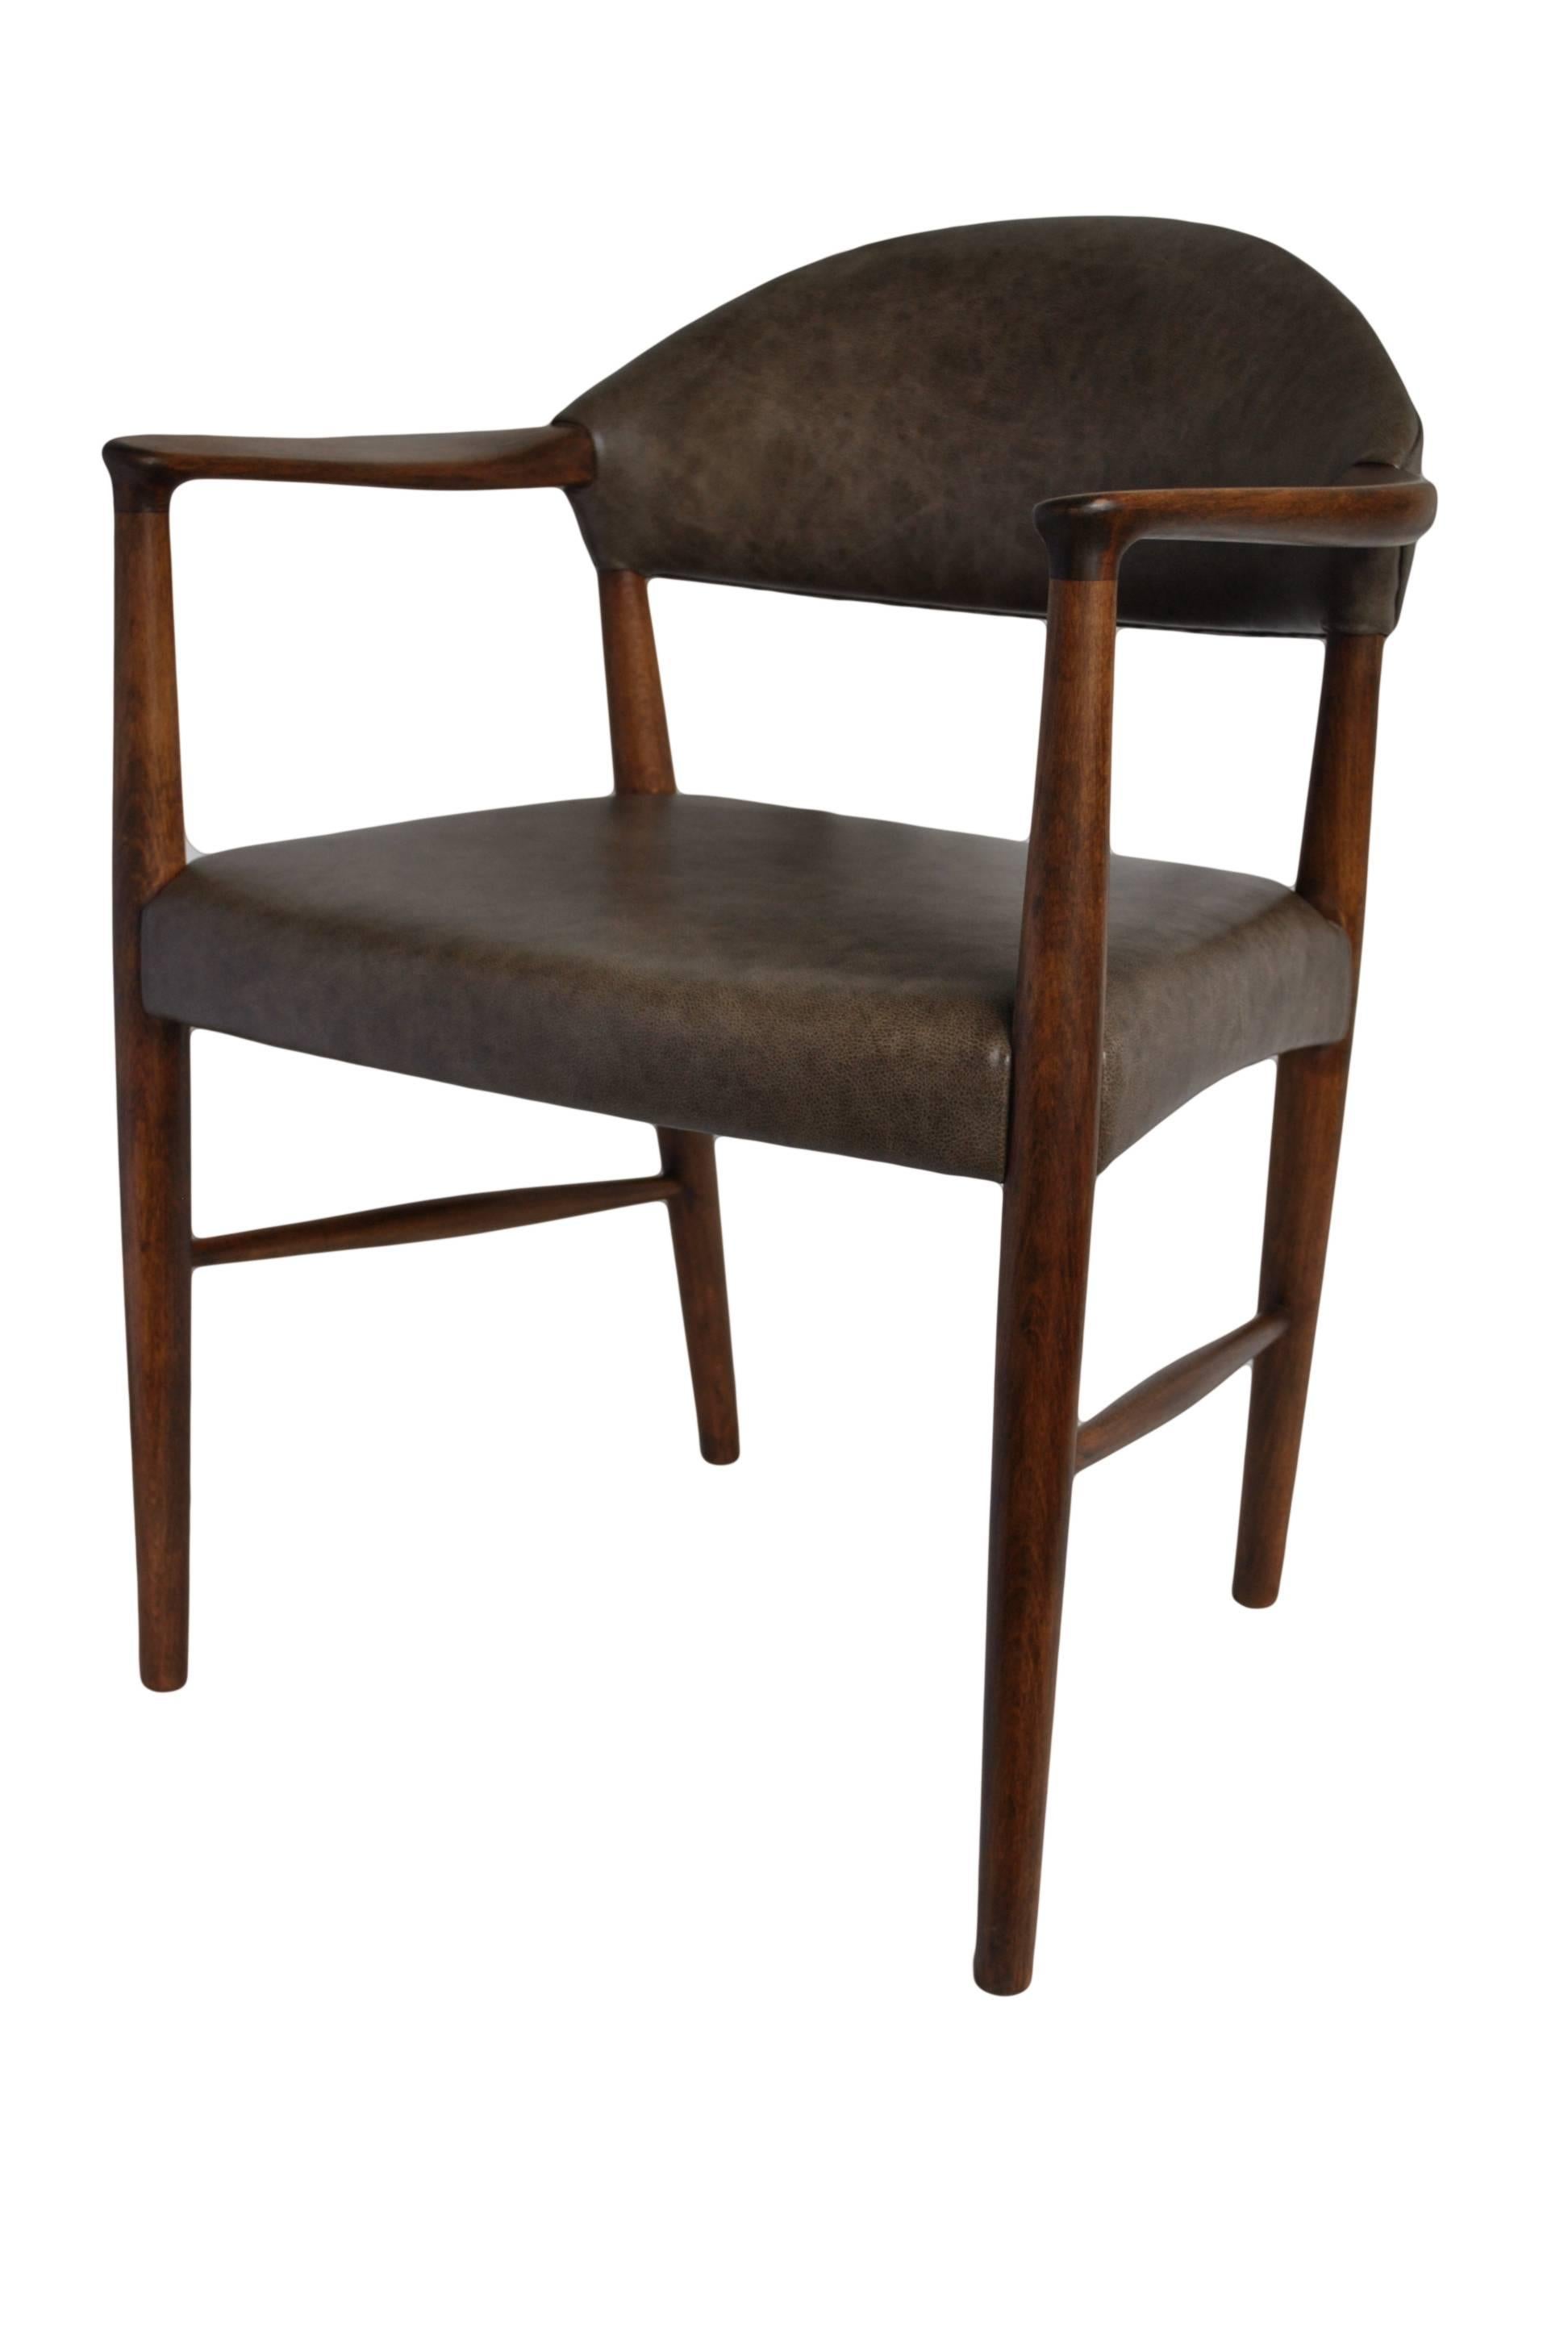 Mid-Century Modern Kurt Olsen Chair, fully refurbished and with new Italian Leather